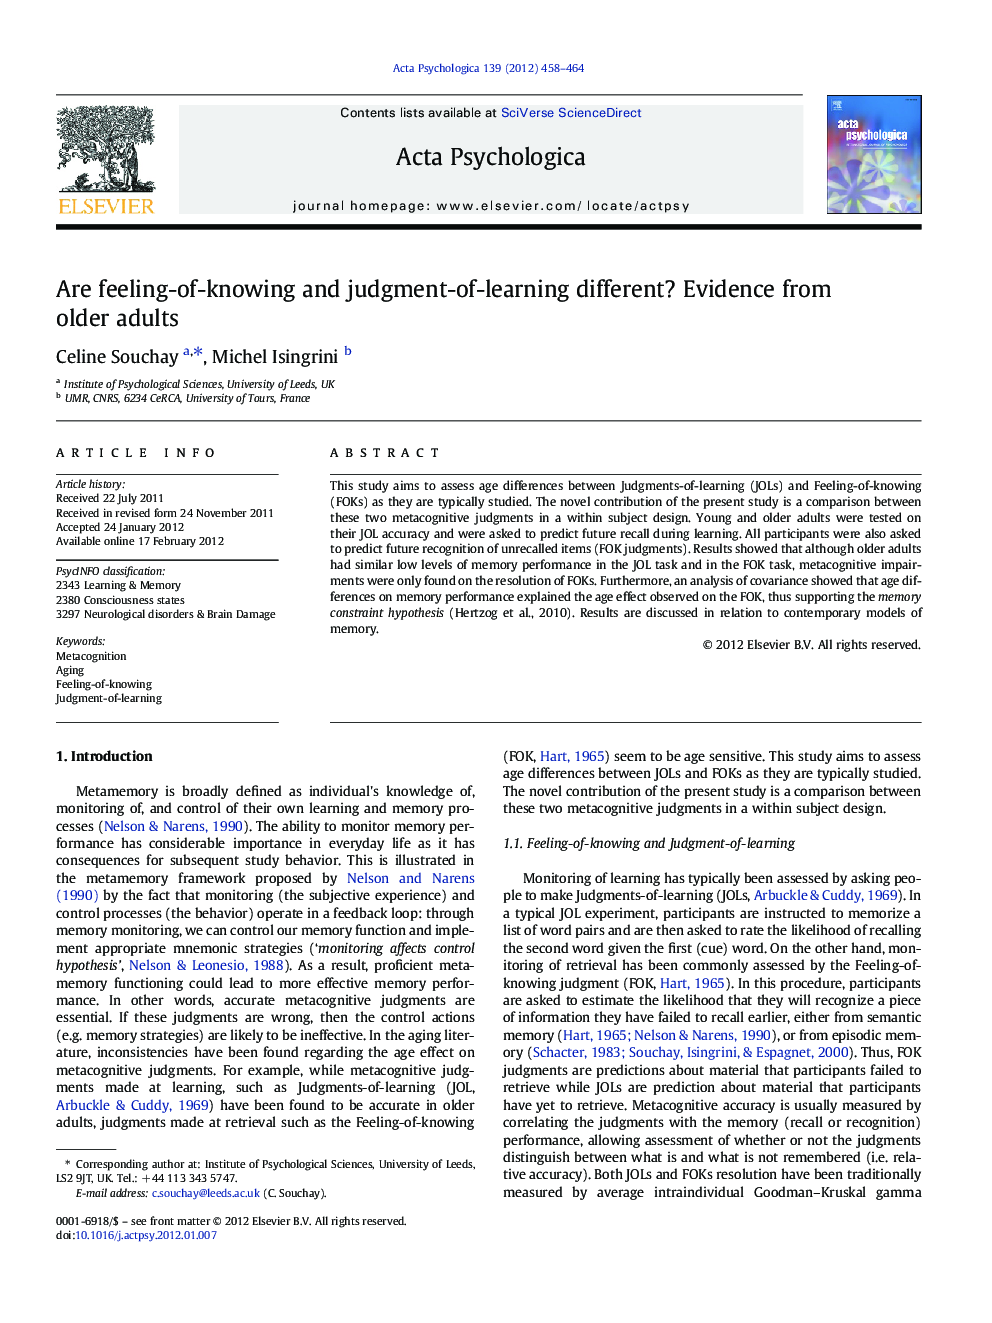 Are feeling-of-knowing and judgment-of-learning different? Evidence from older adults